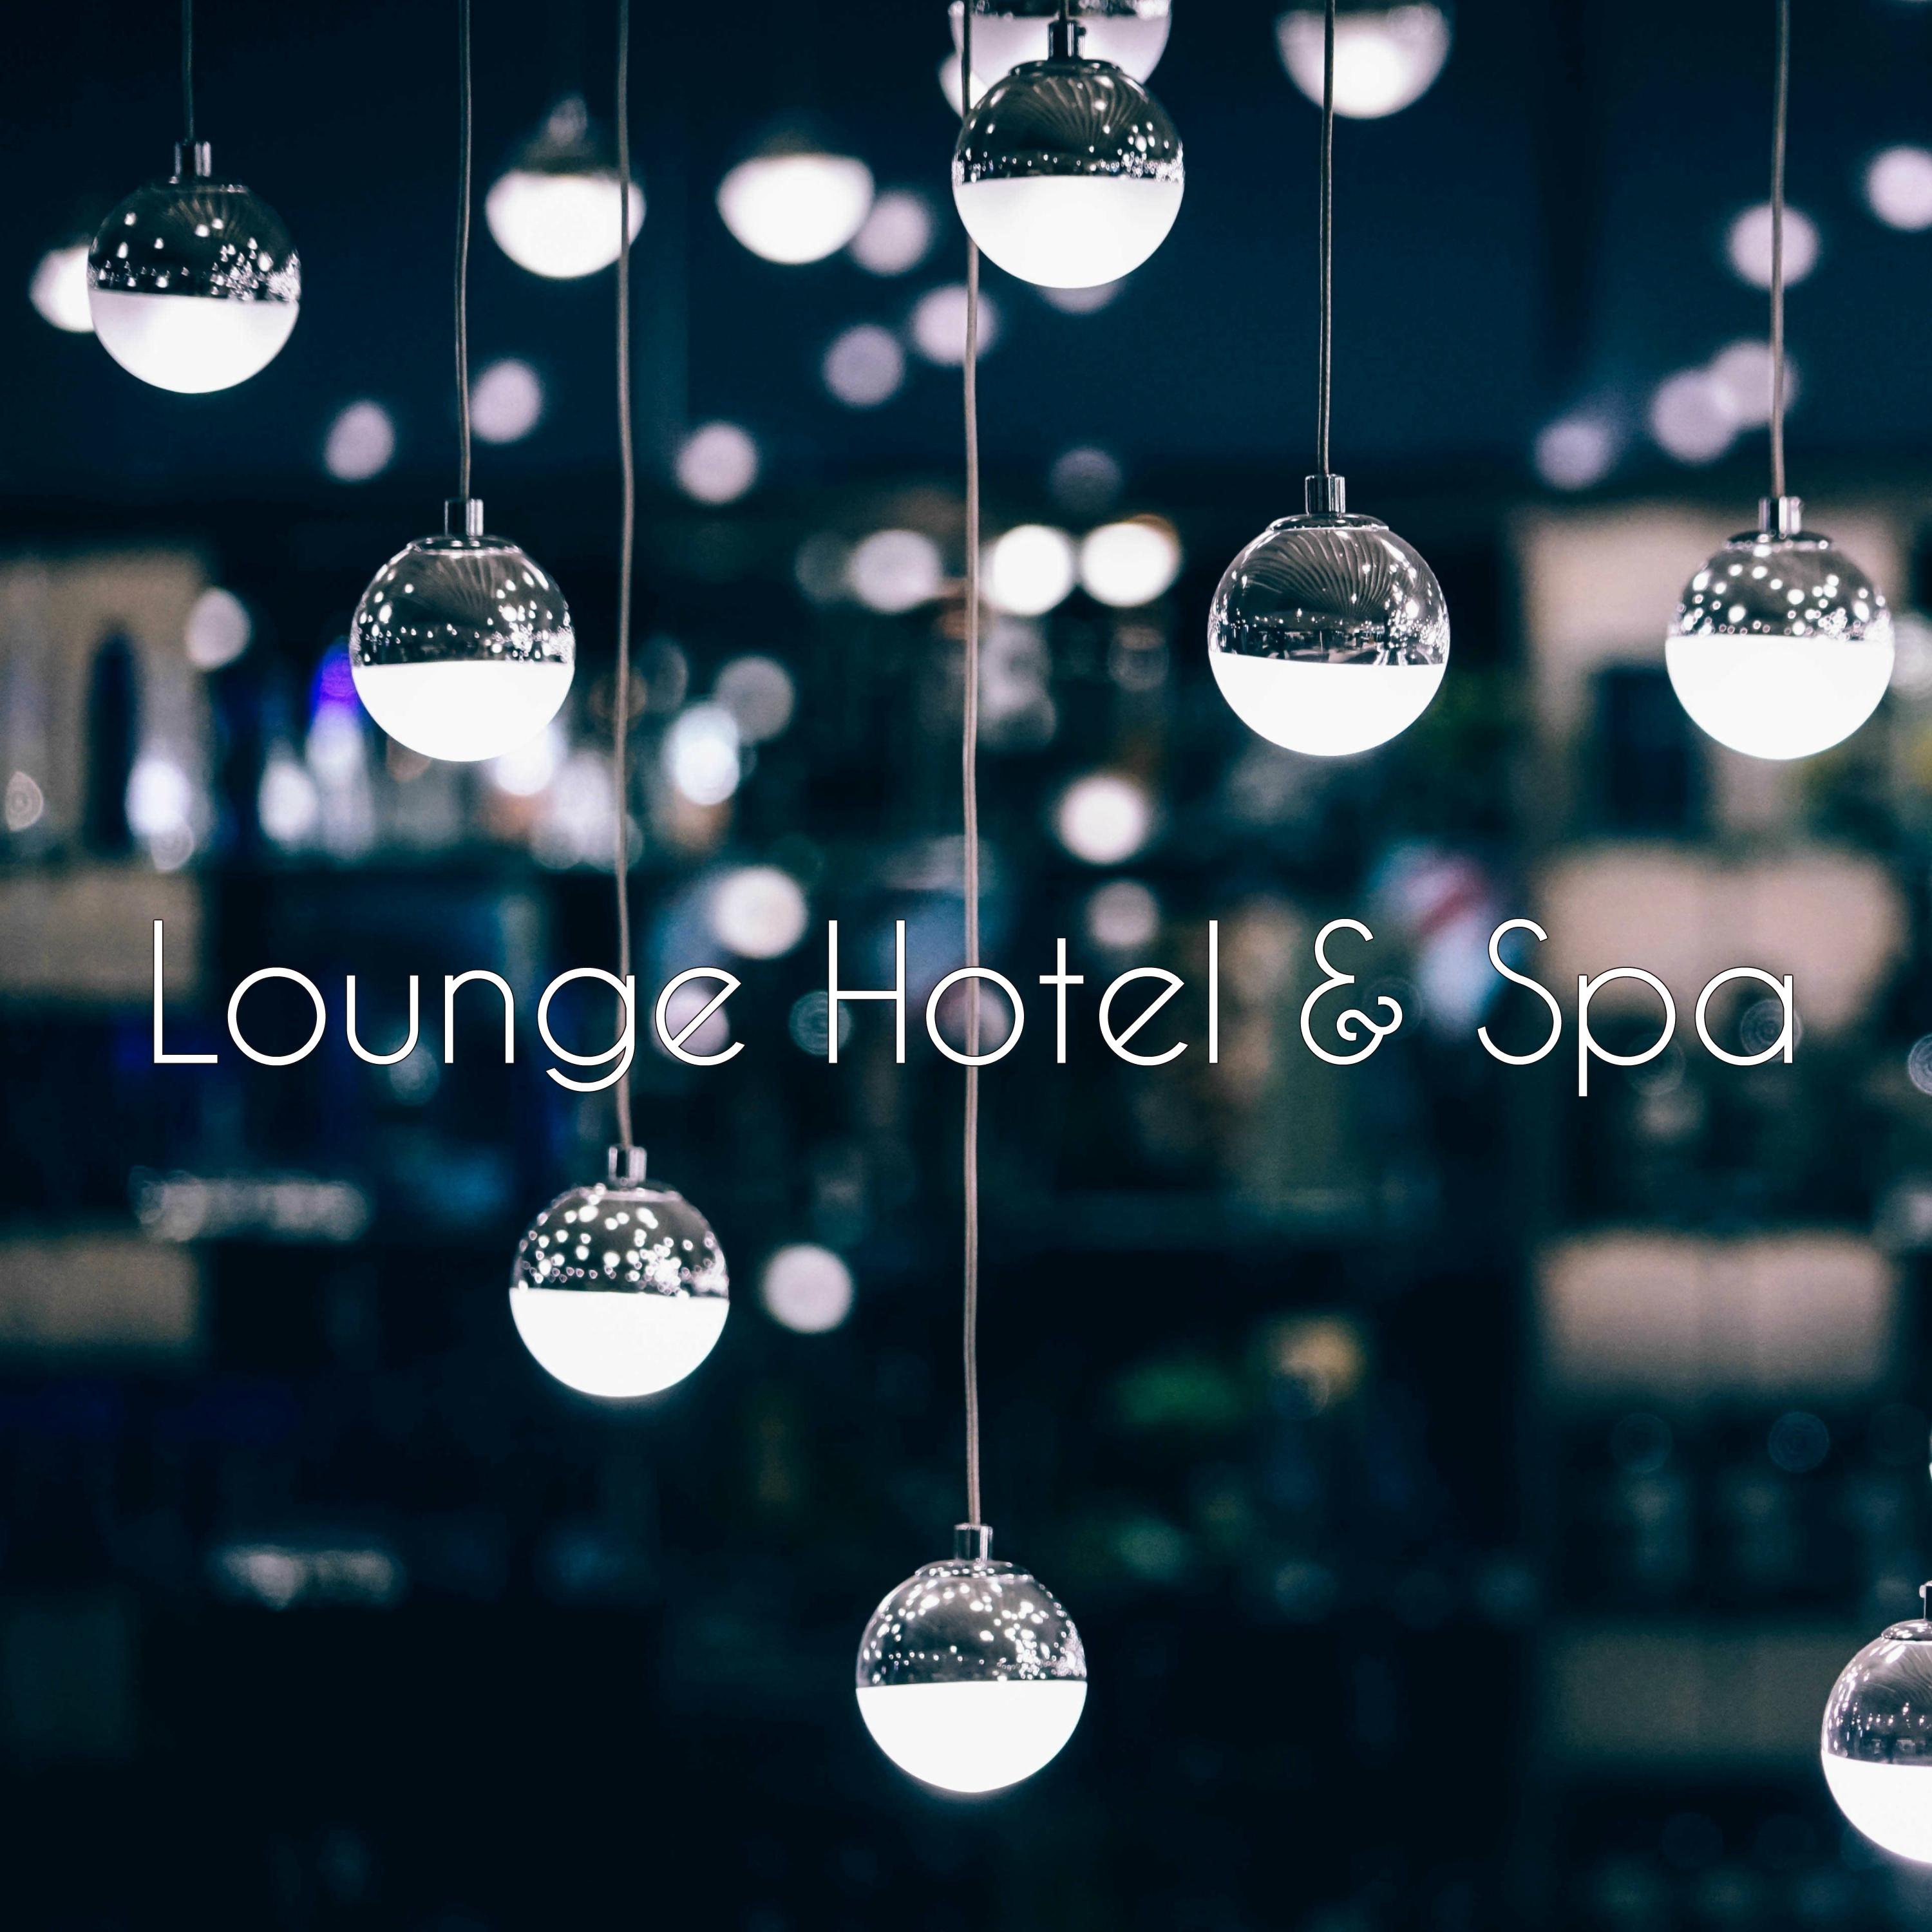 Lounge Hotel & Spa – Wellness Chillout for Massge Room & Spa Breaks for Couples